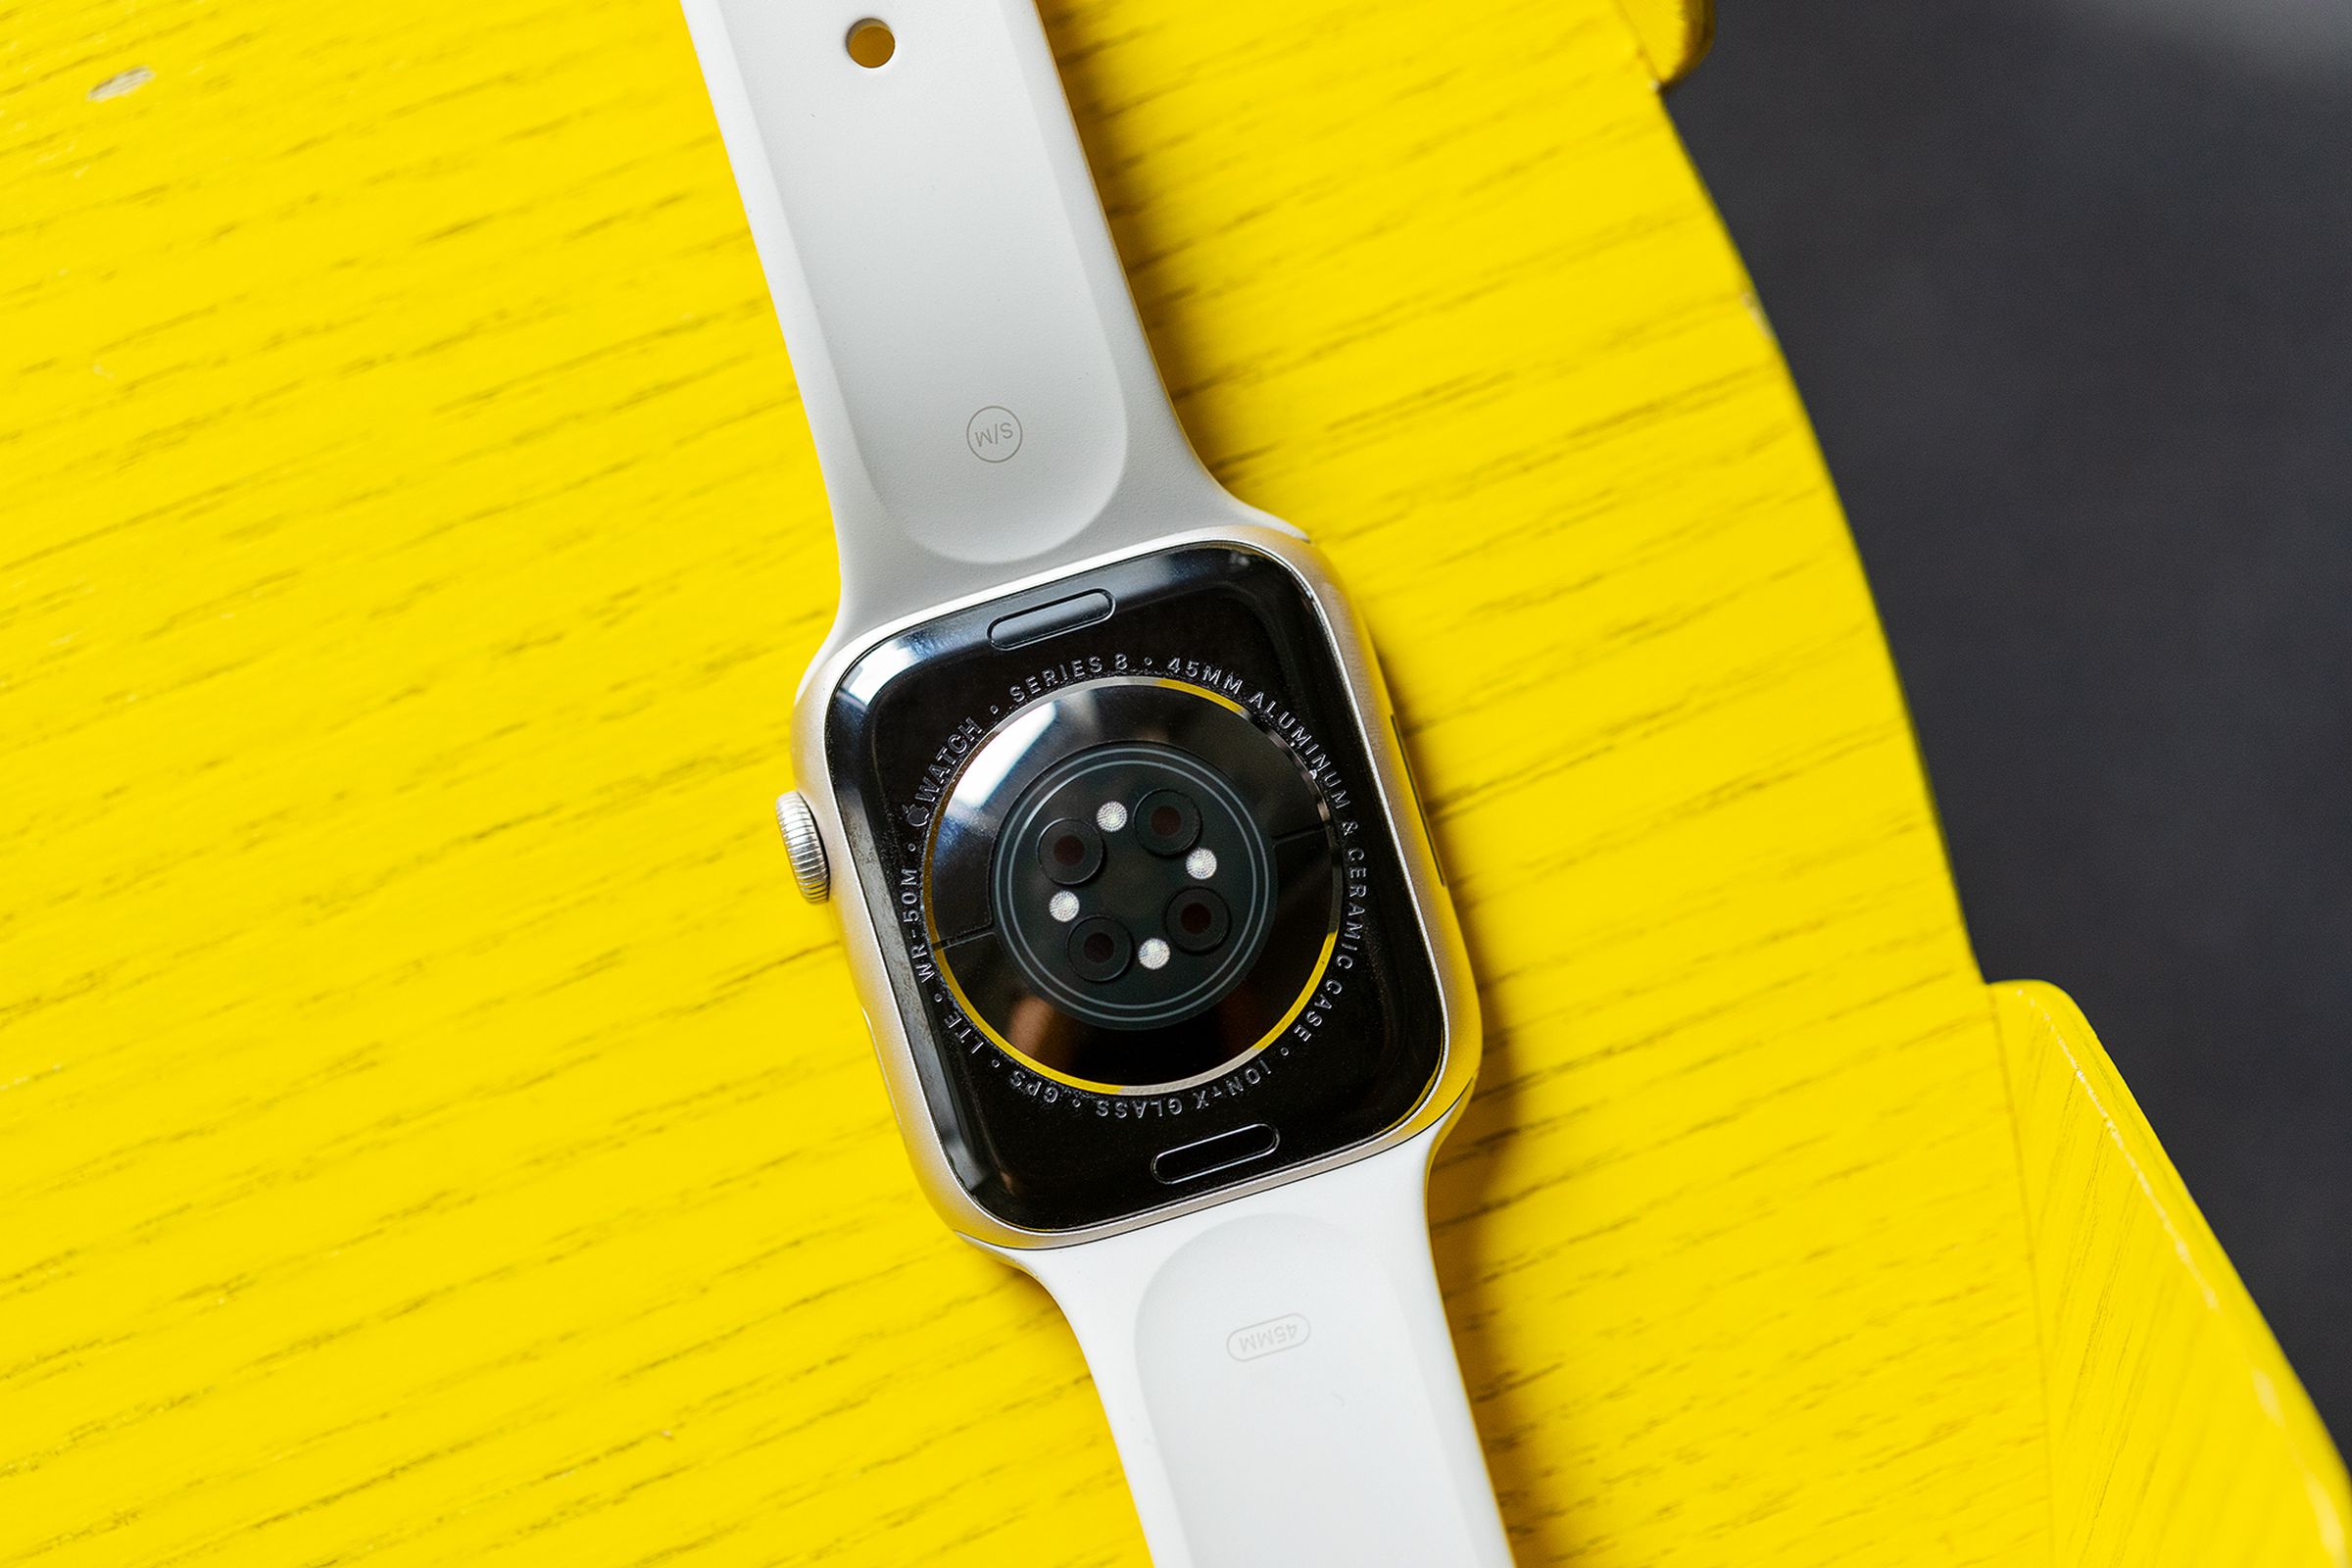 Rear shot of the Apple Watch Series 8 showing the sensor array